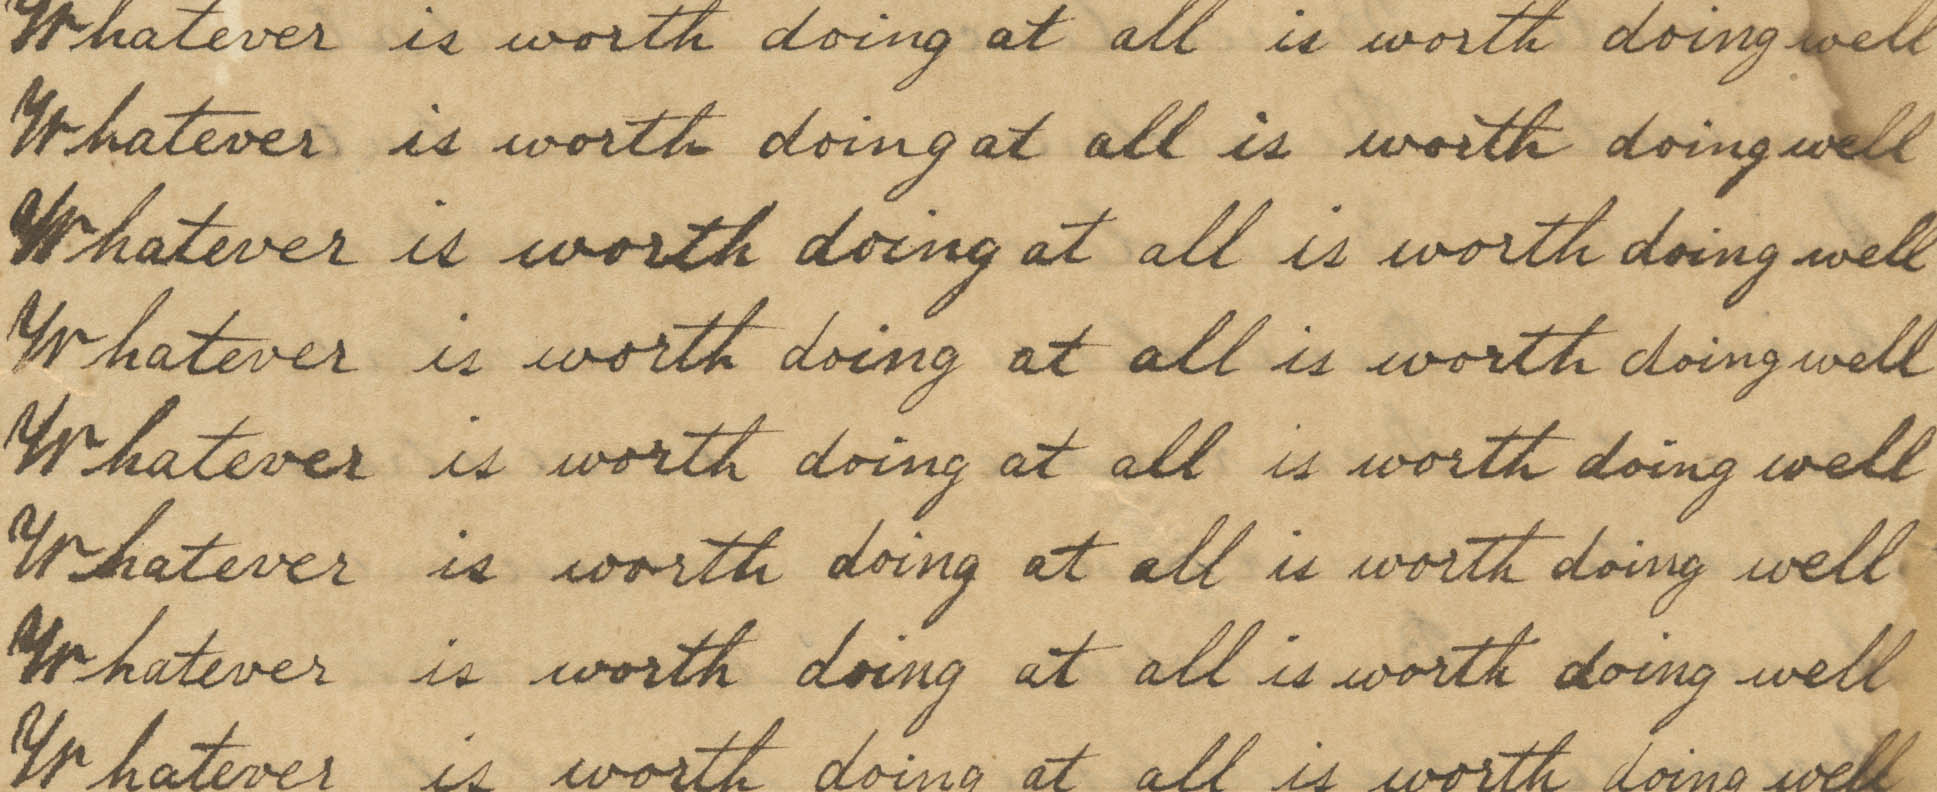 “Whatever worth doing at all is worth doing well,” 1862